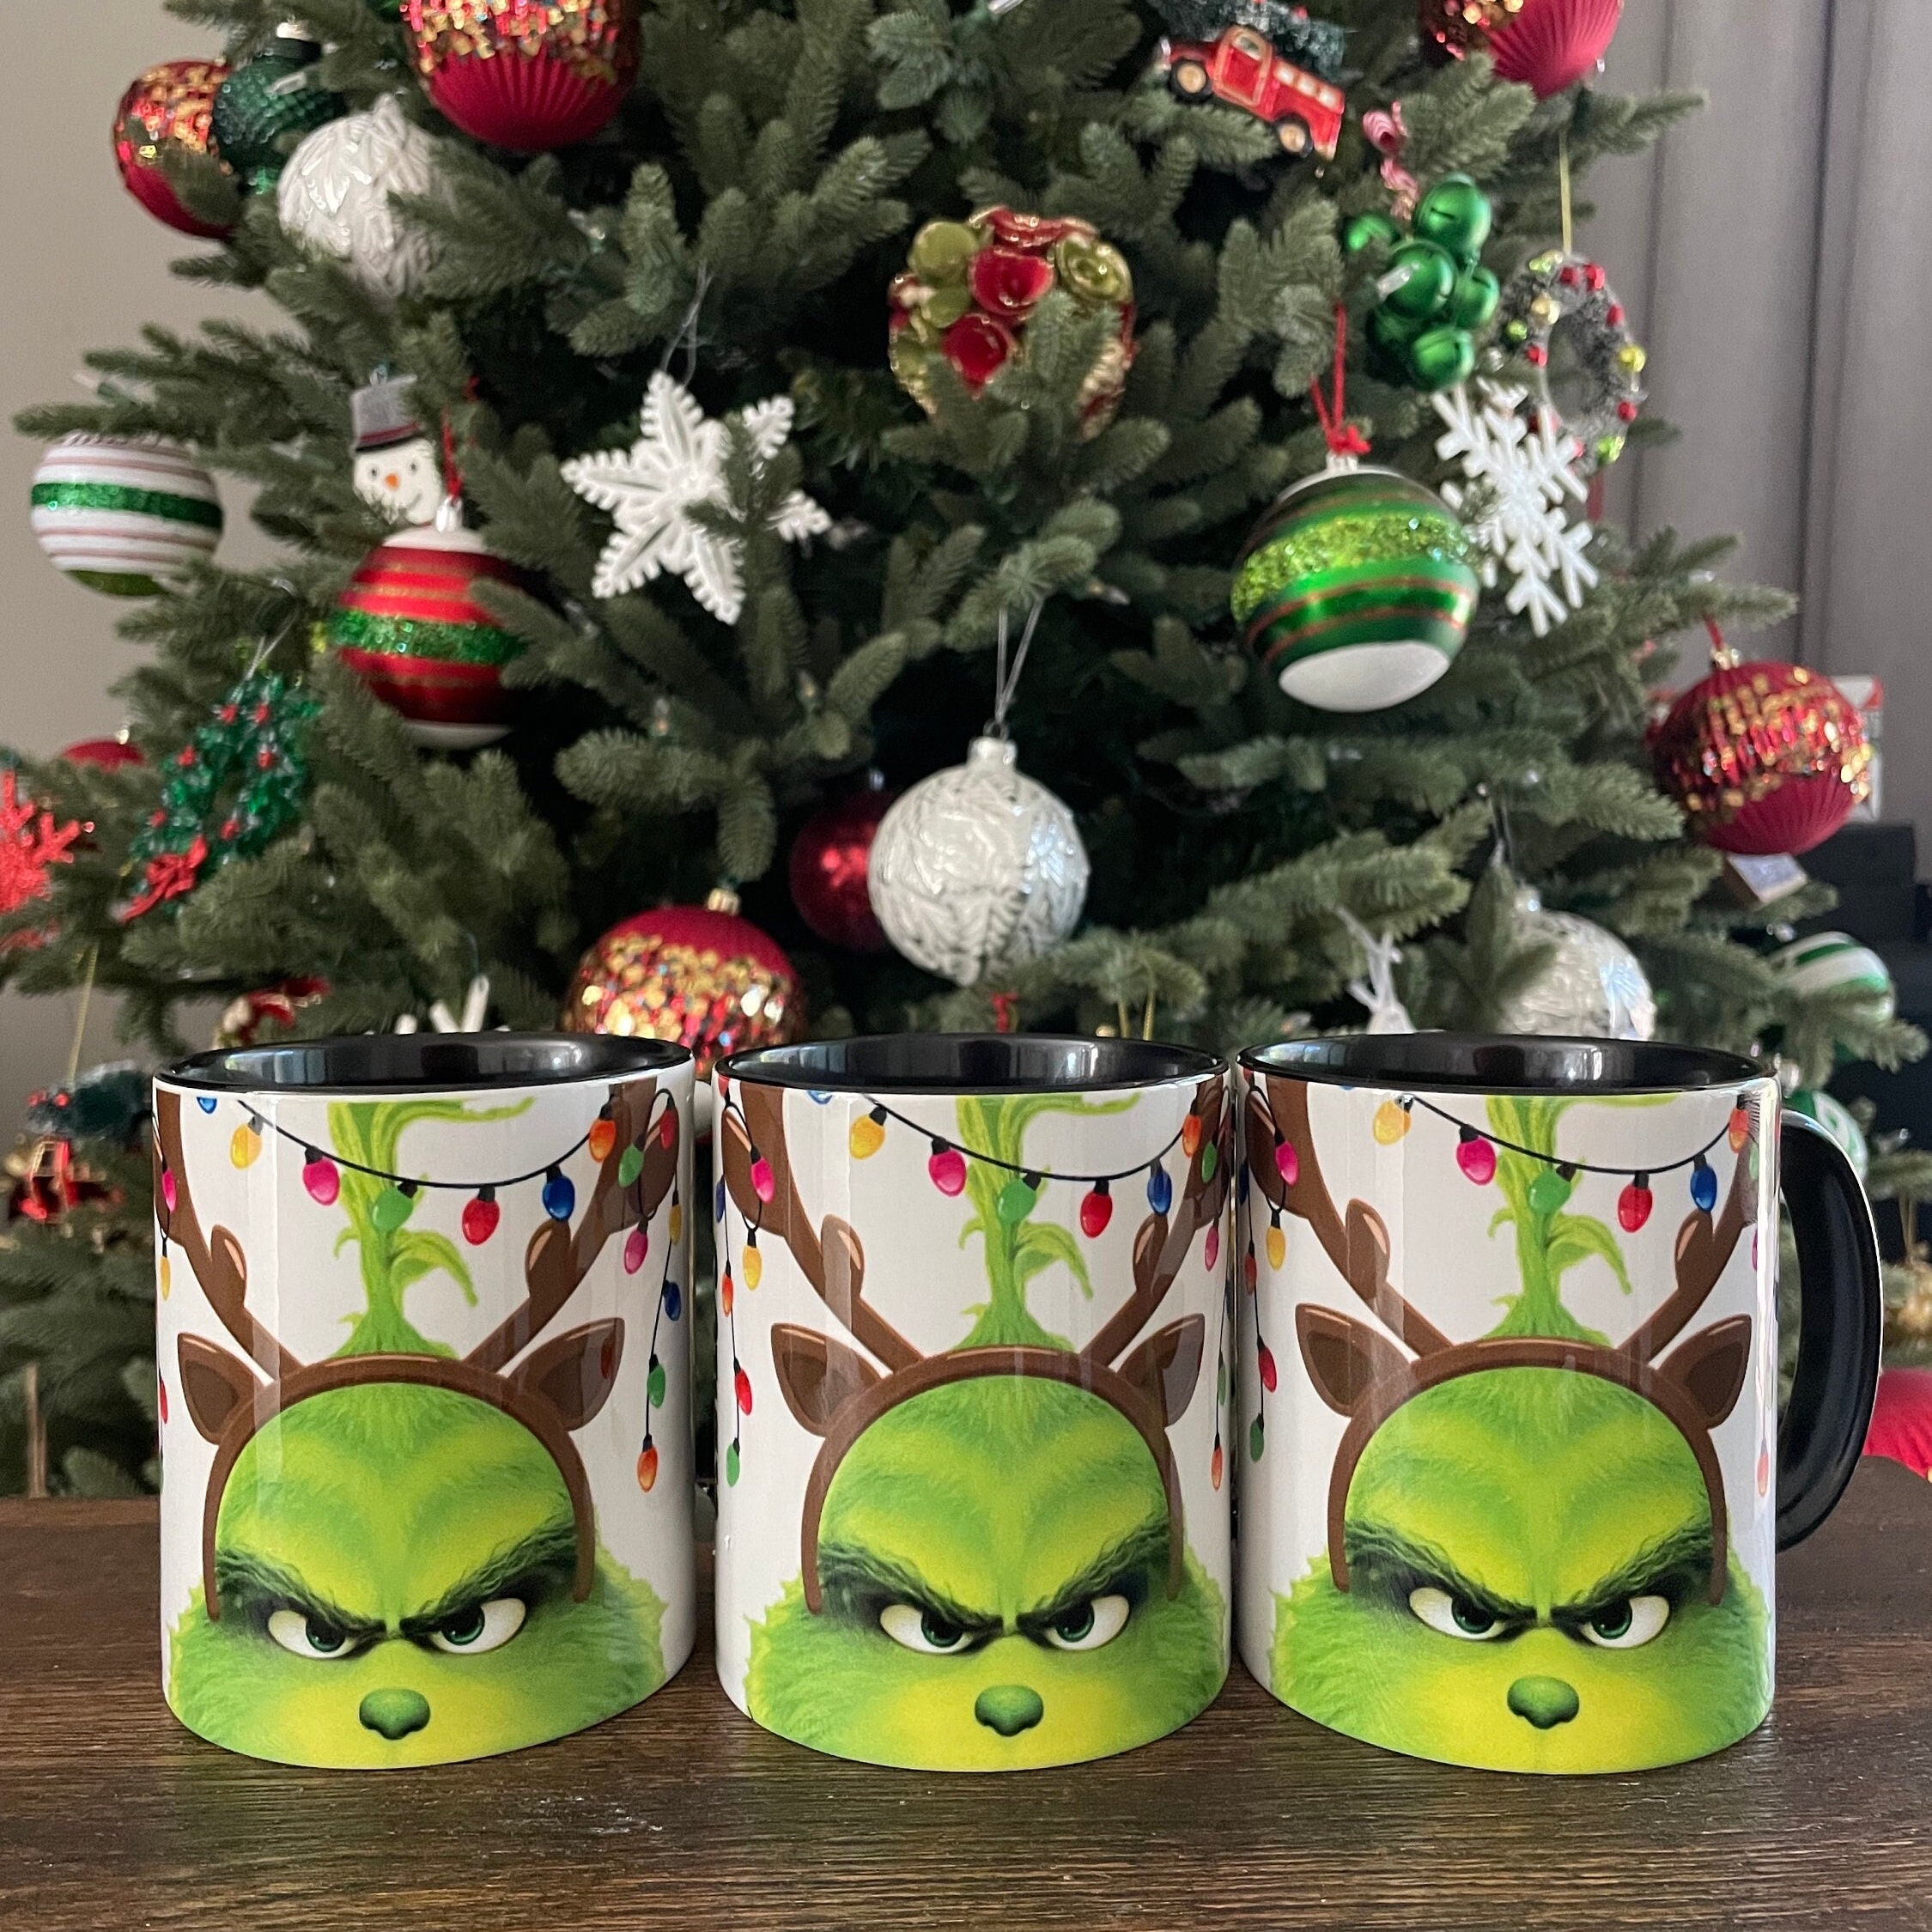  Arsemica Funny Grinch Mug, Novelty Christmas Coffee Mug, 11oz  Grinch Drinking Cup, Christmas Party Cups for Table Decorations, Xmas White  Elephant Gifts for Women Men Coworkers : Home & Kitchen